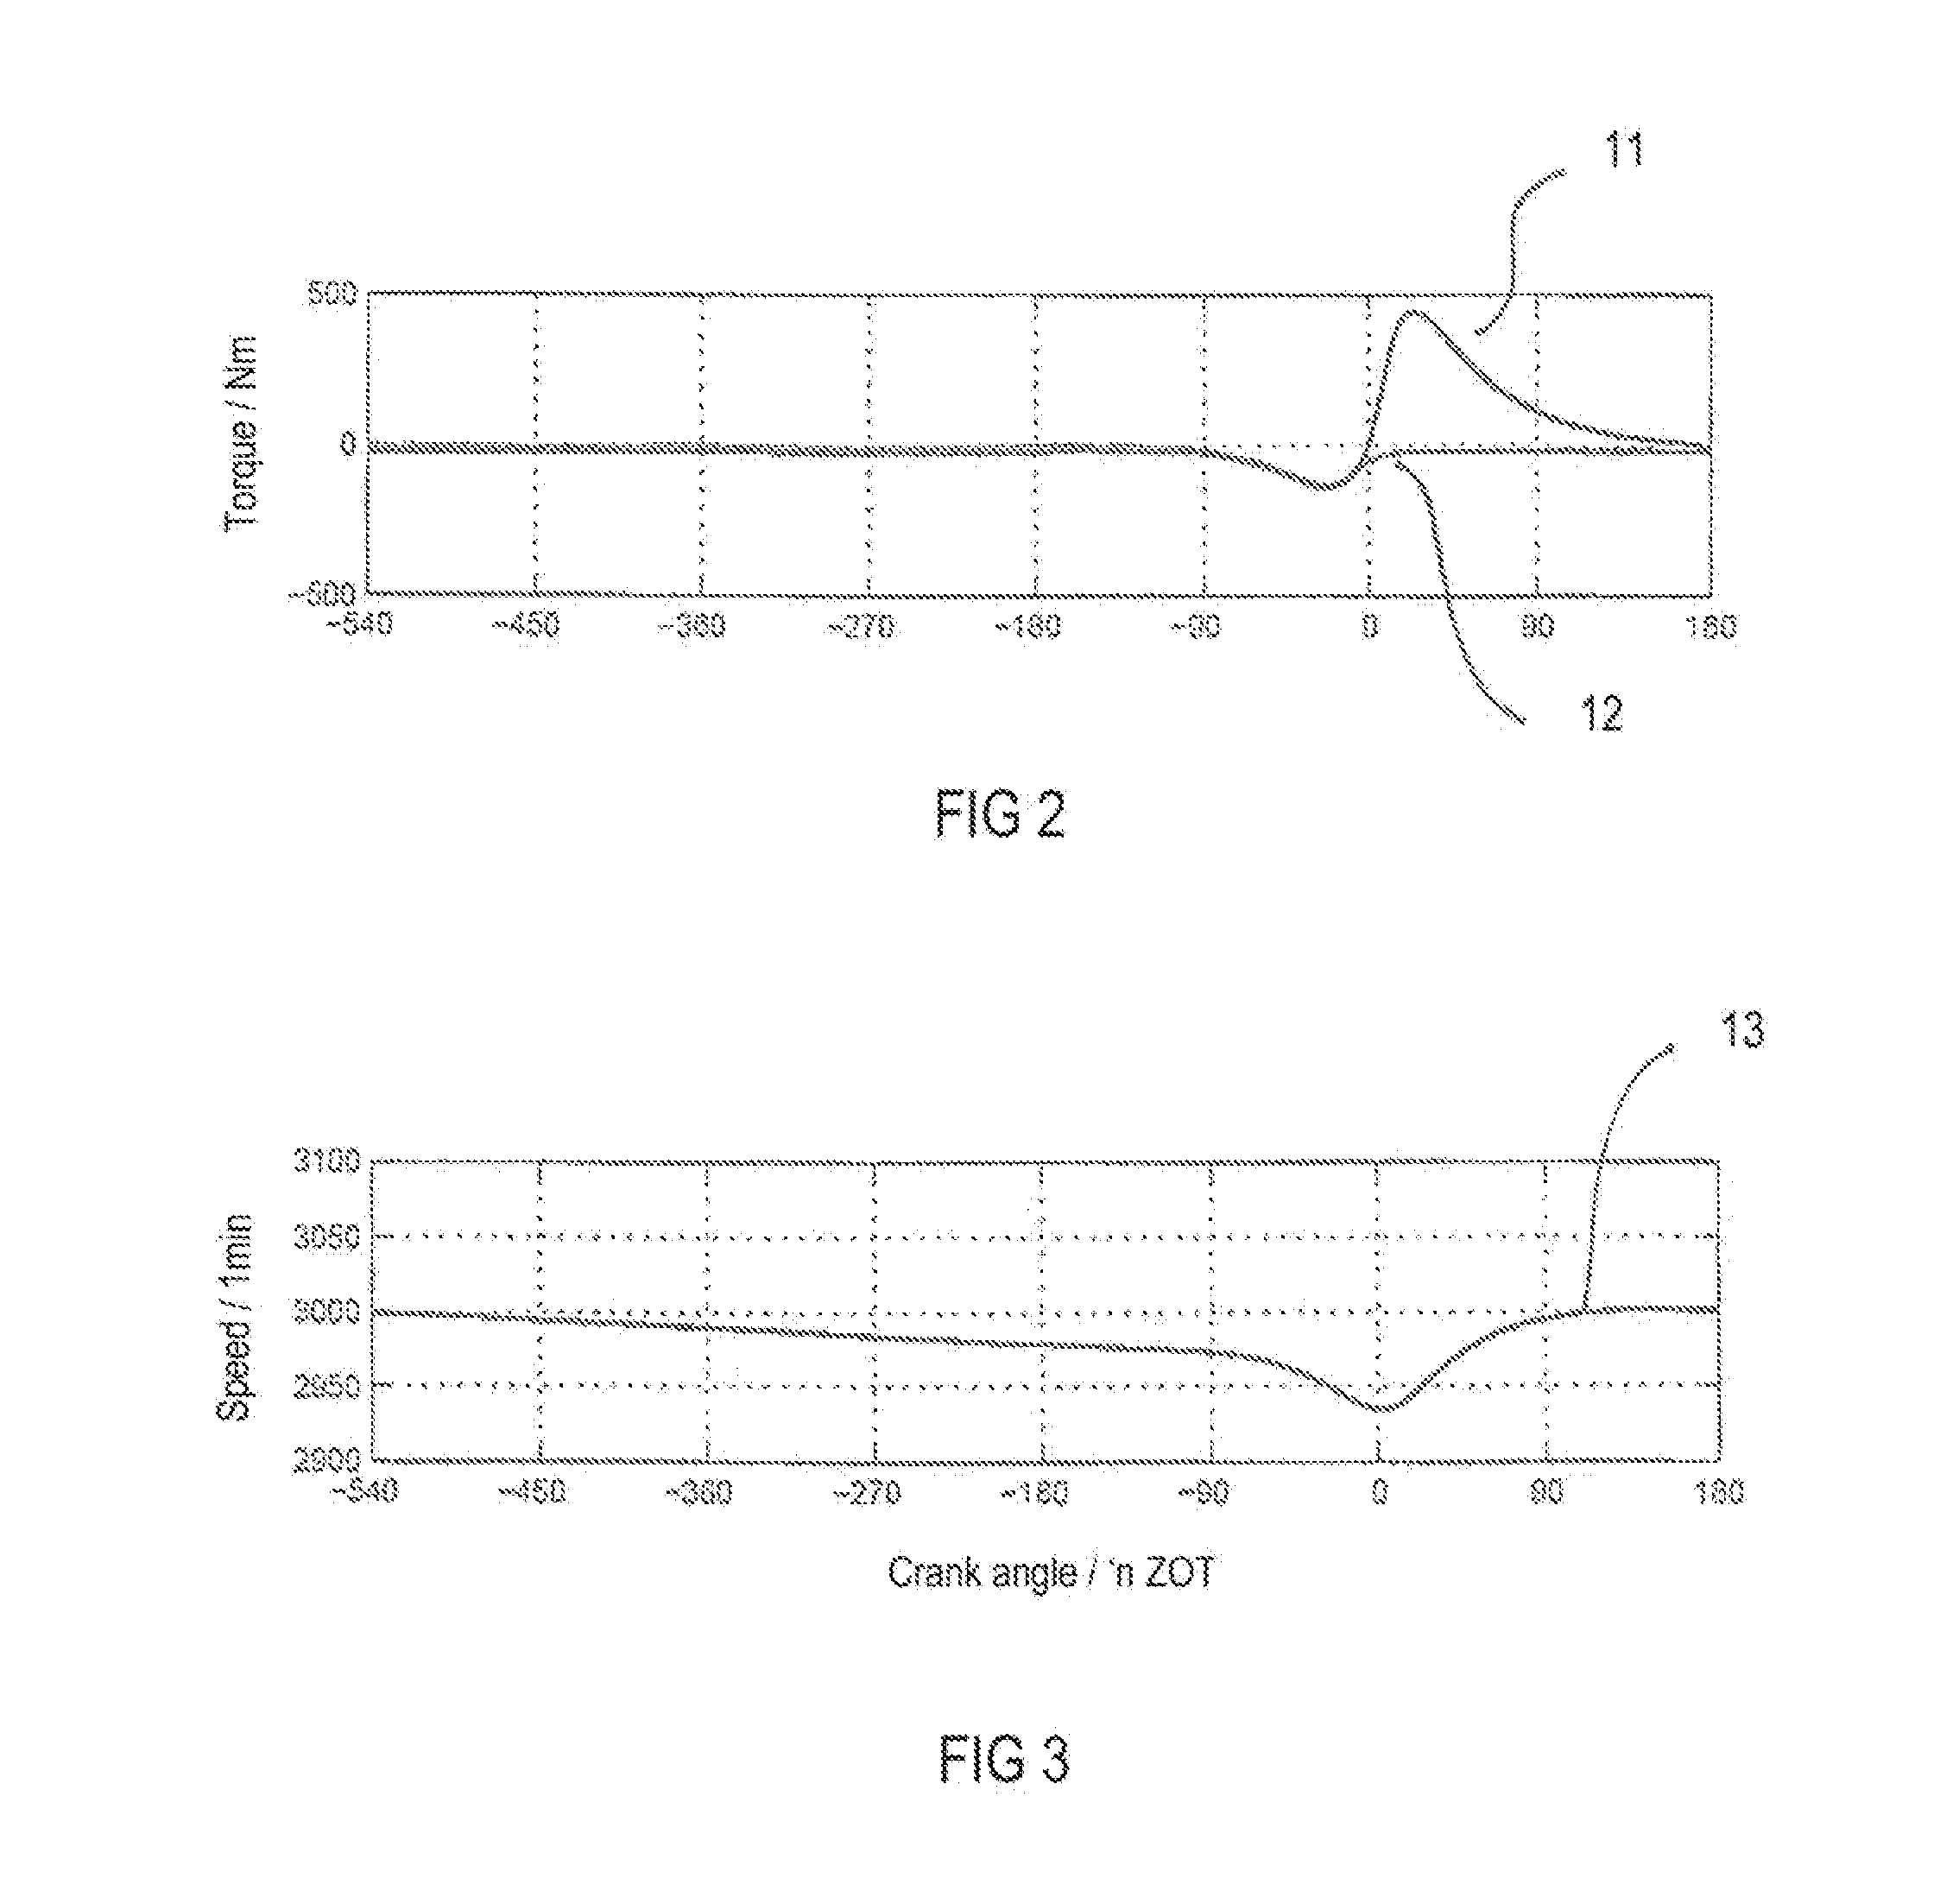 Generator control system for smooth operation with combusion engine